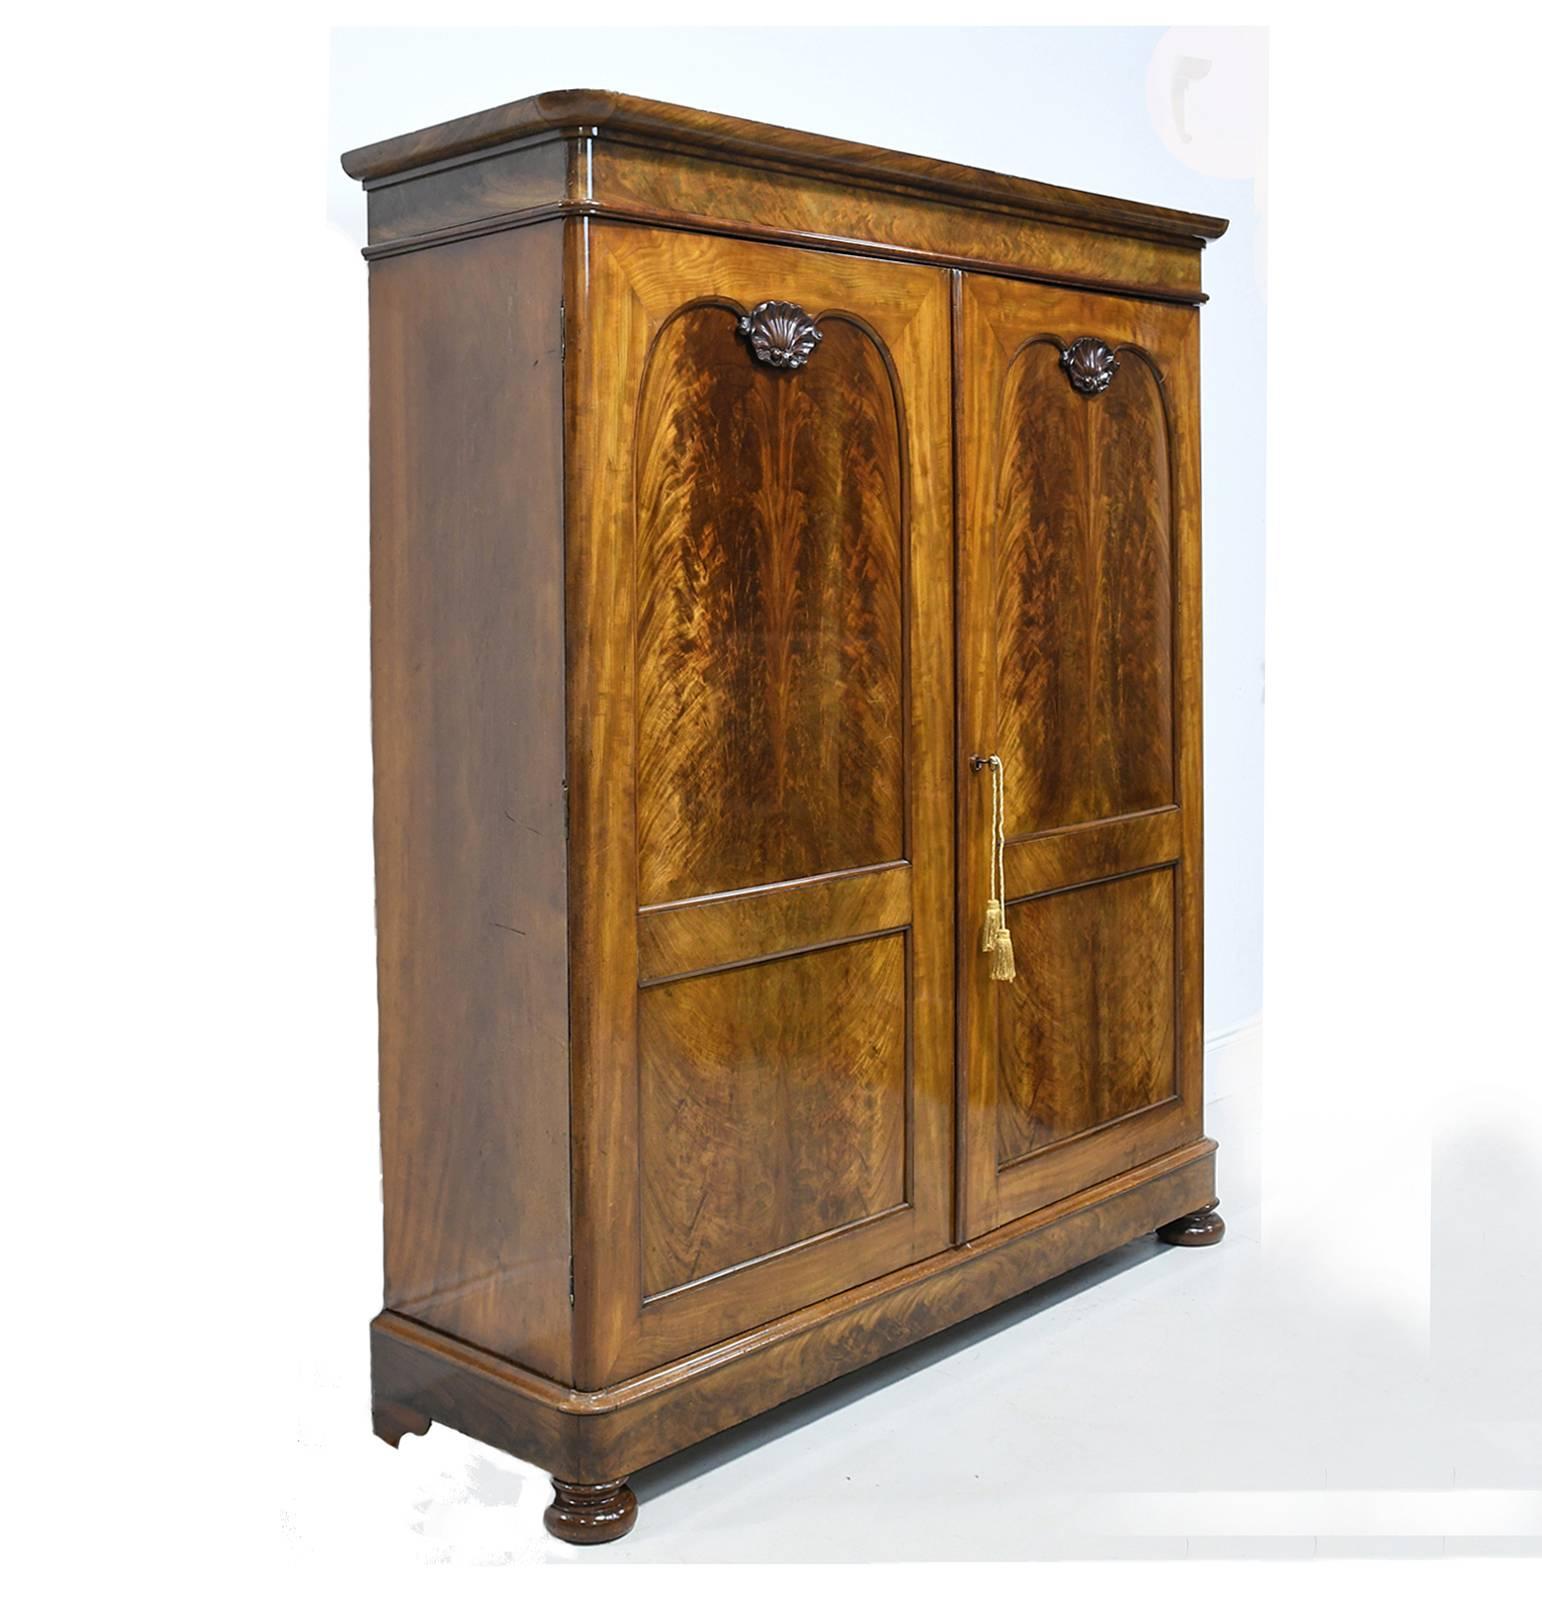 Polished Large French Louis Philippe Armoire in Figured Mahogany with Original Interior